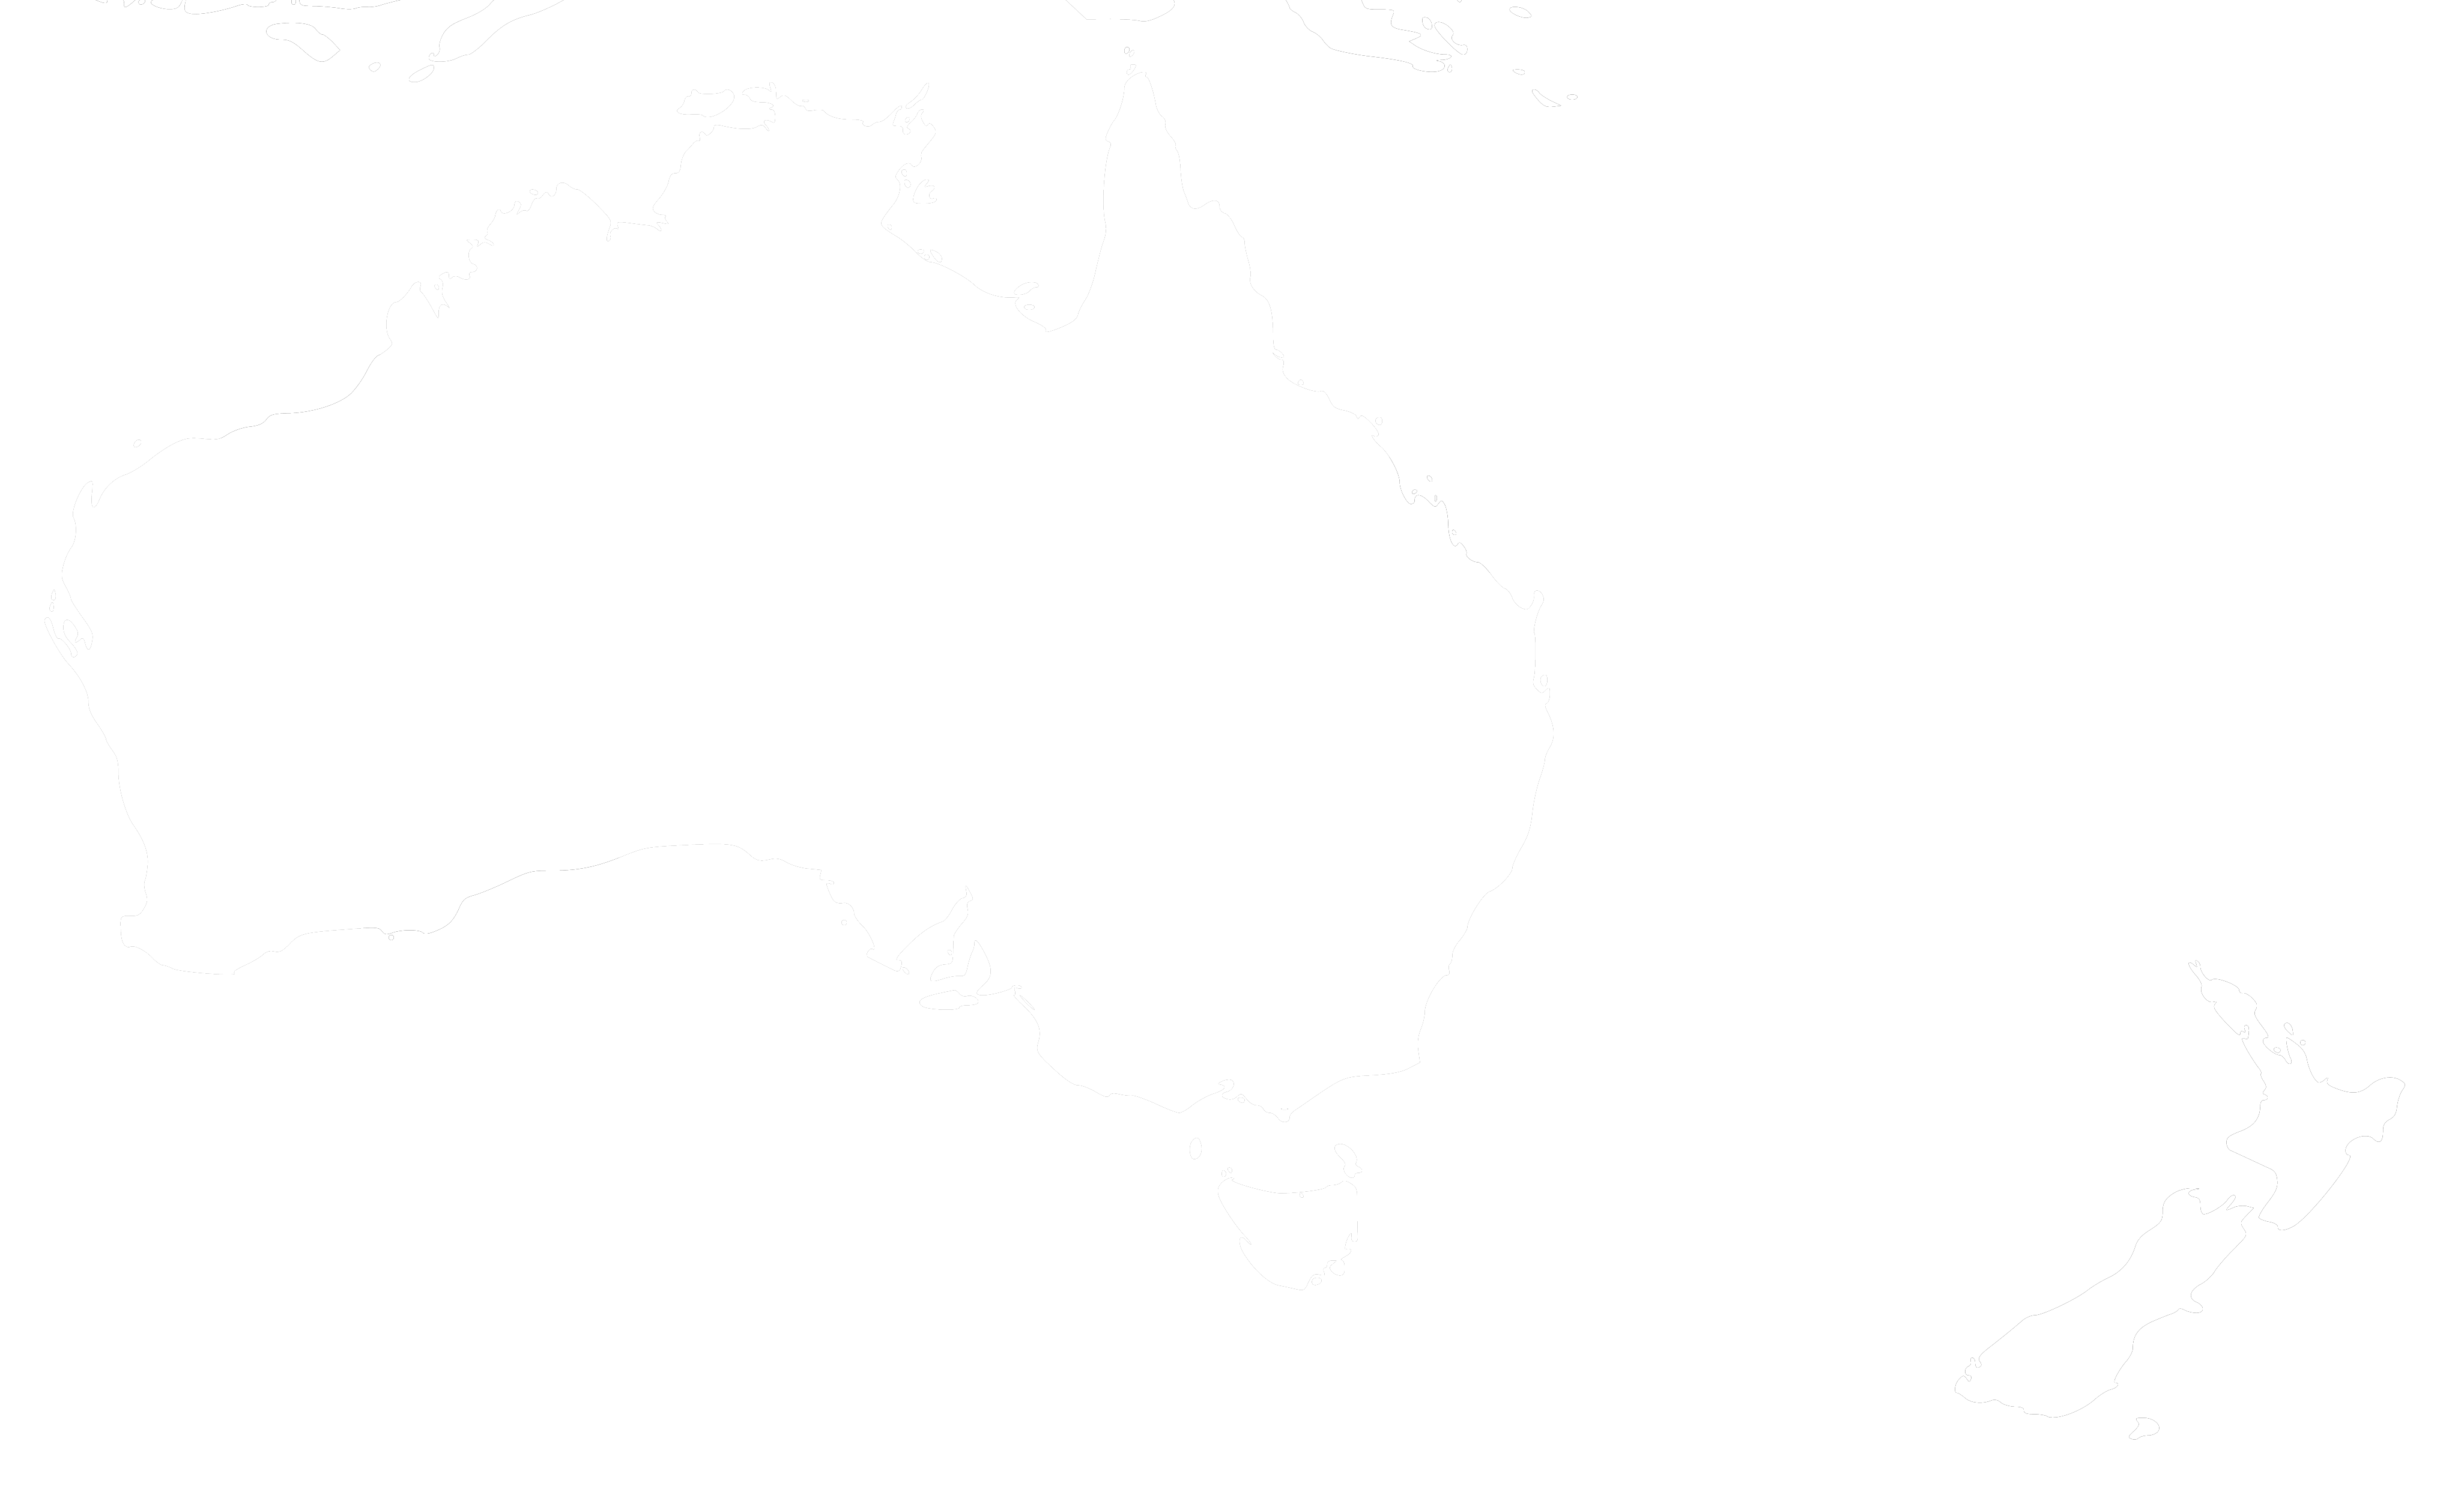 Map of Australia and New Zealand